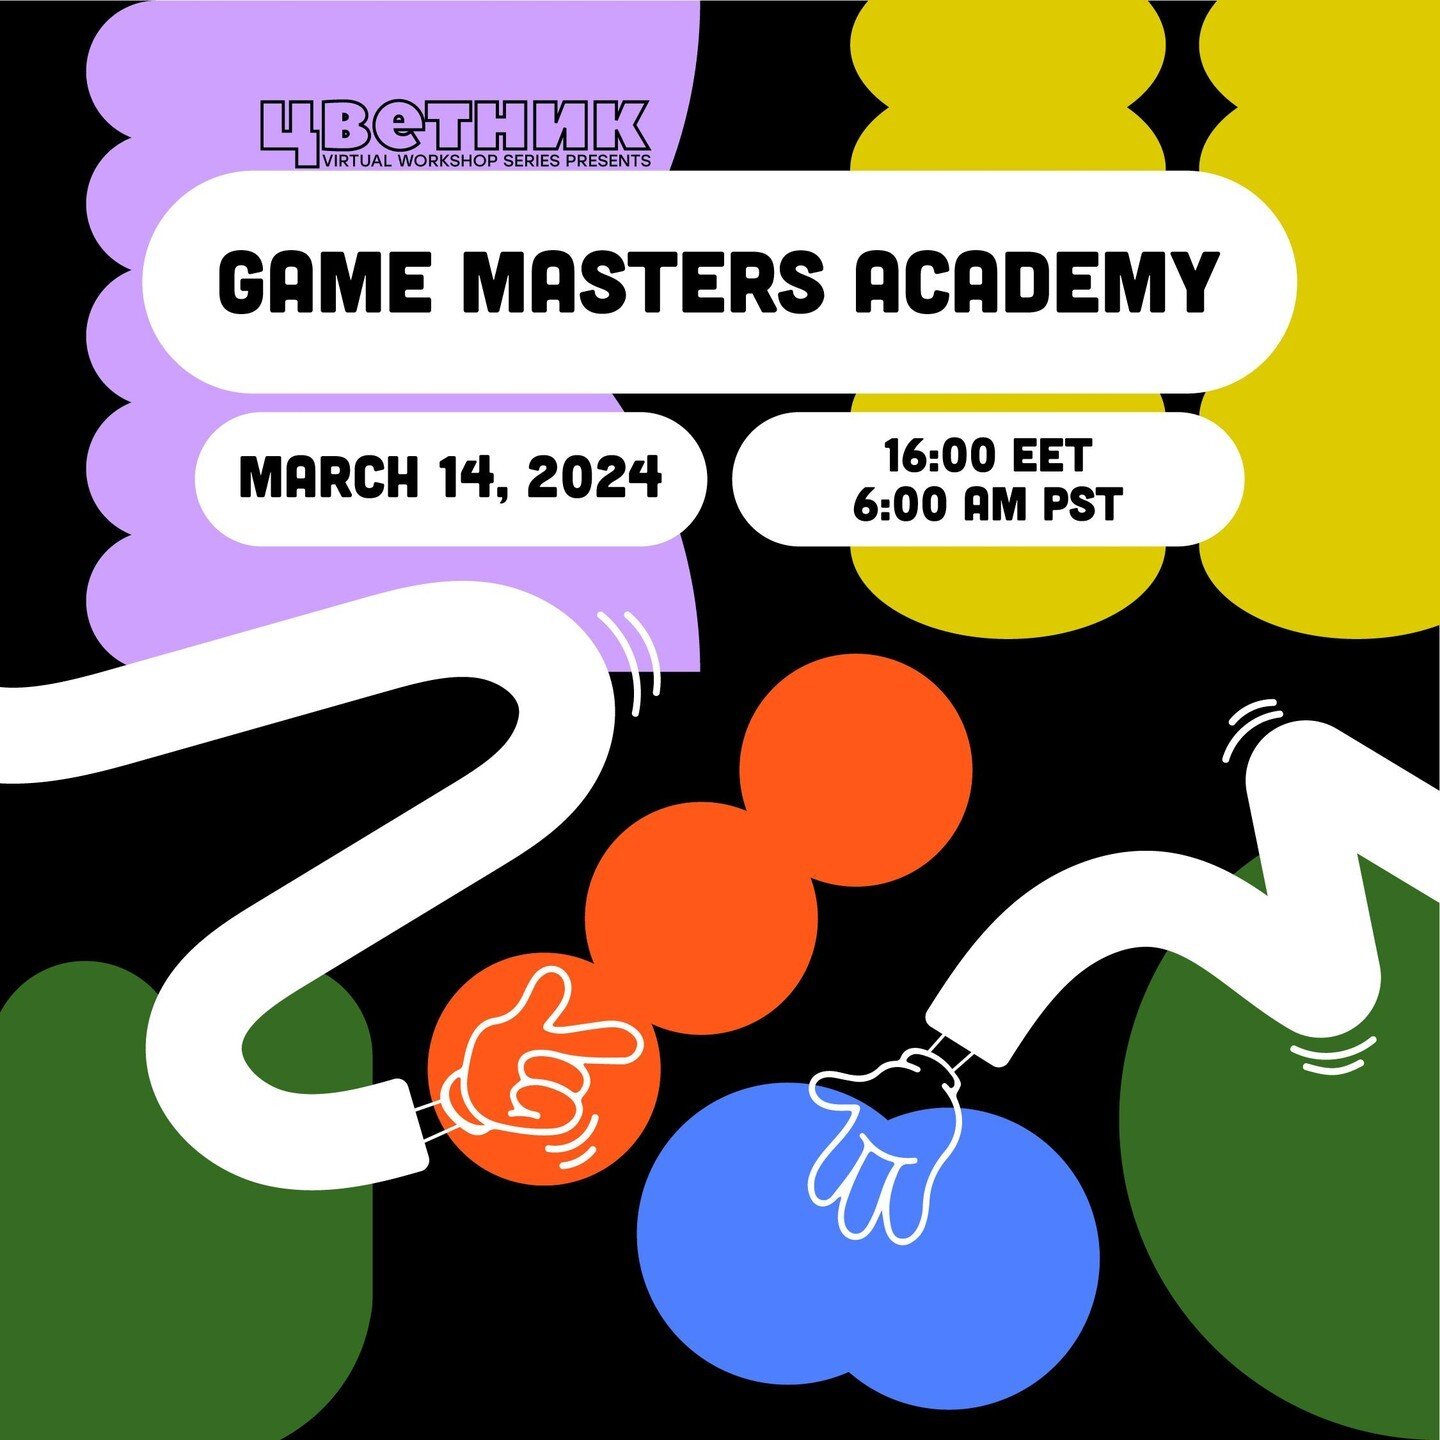 Join us on March 14th, 2024, at 6:00 AM PST / 16:00 EET for a FREE Training of Trainers for English Language Teachers in Russia on the topic of Gamification In English Classes - &quot;Game Masters Academy: Level Up Your English Teaching Skills.&quot;